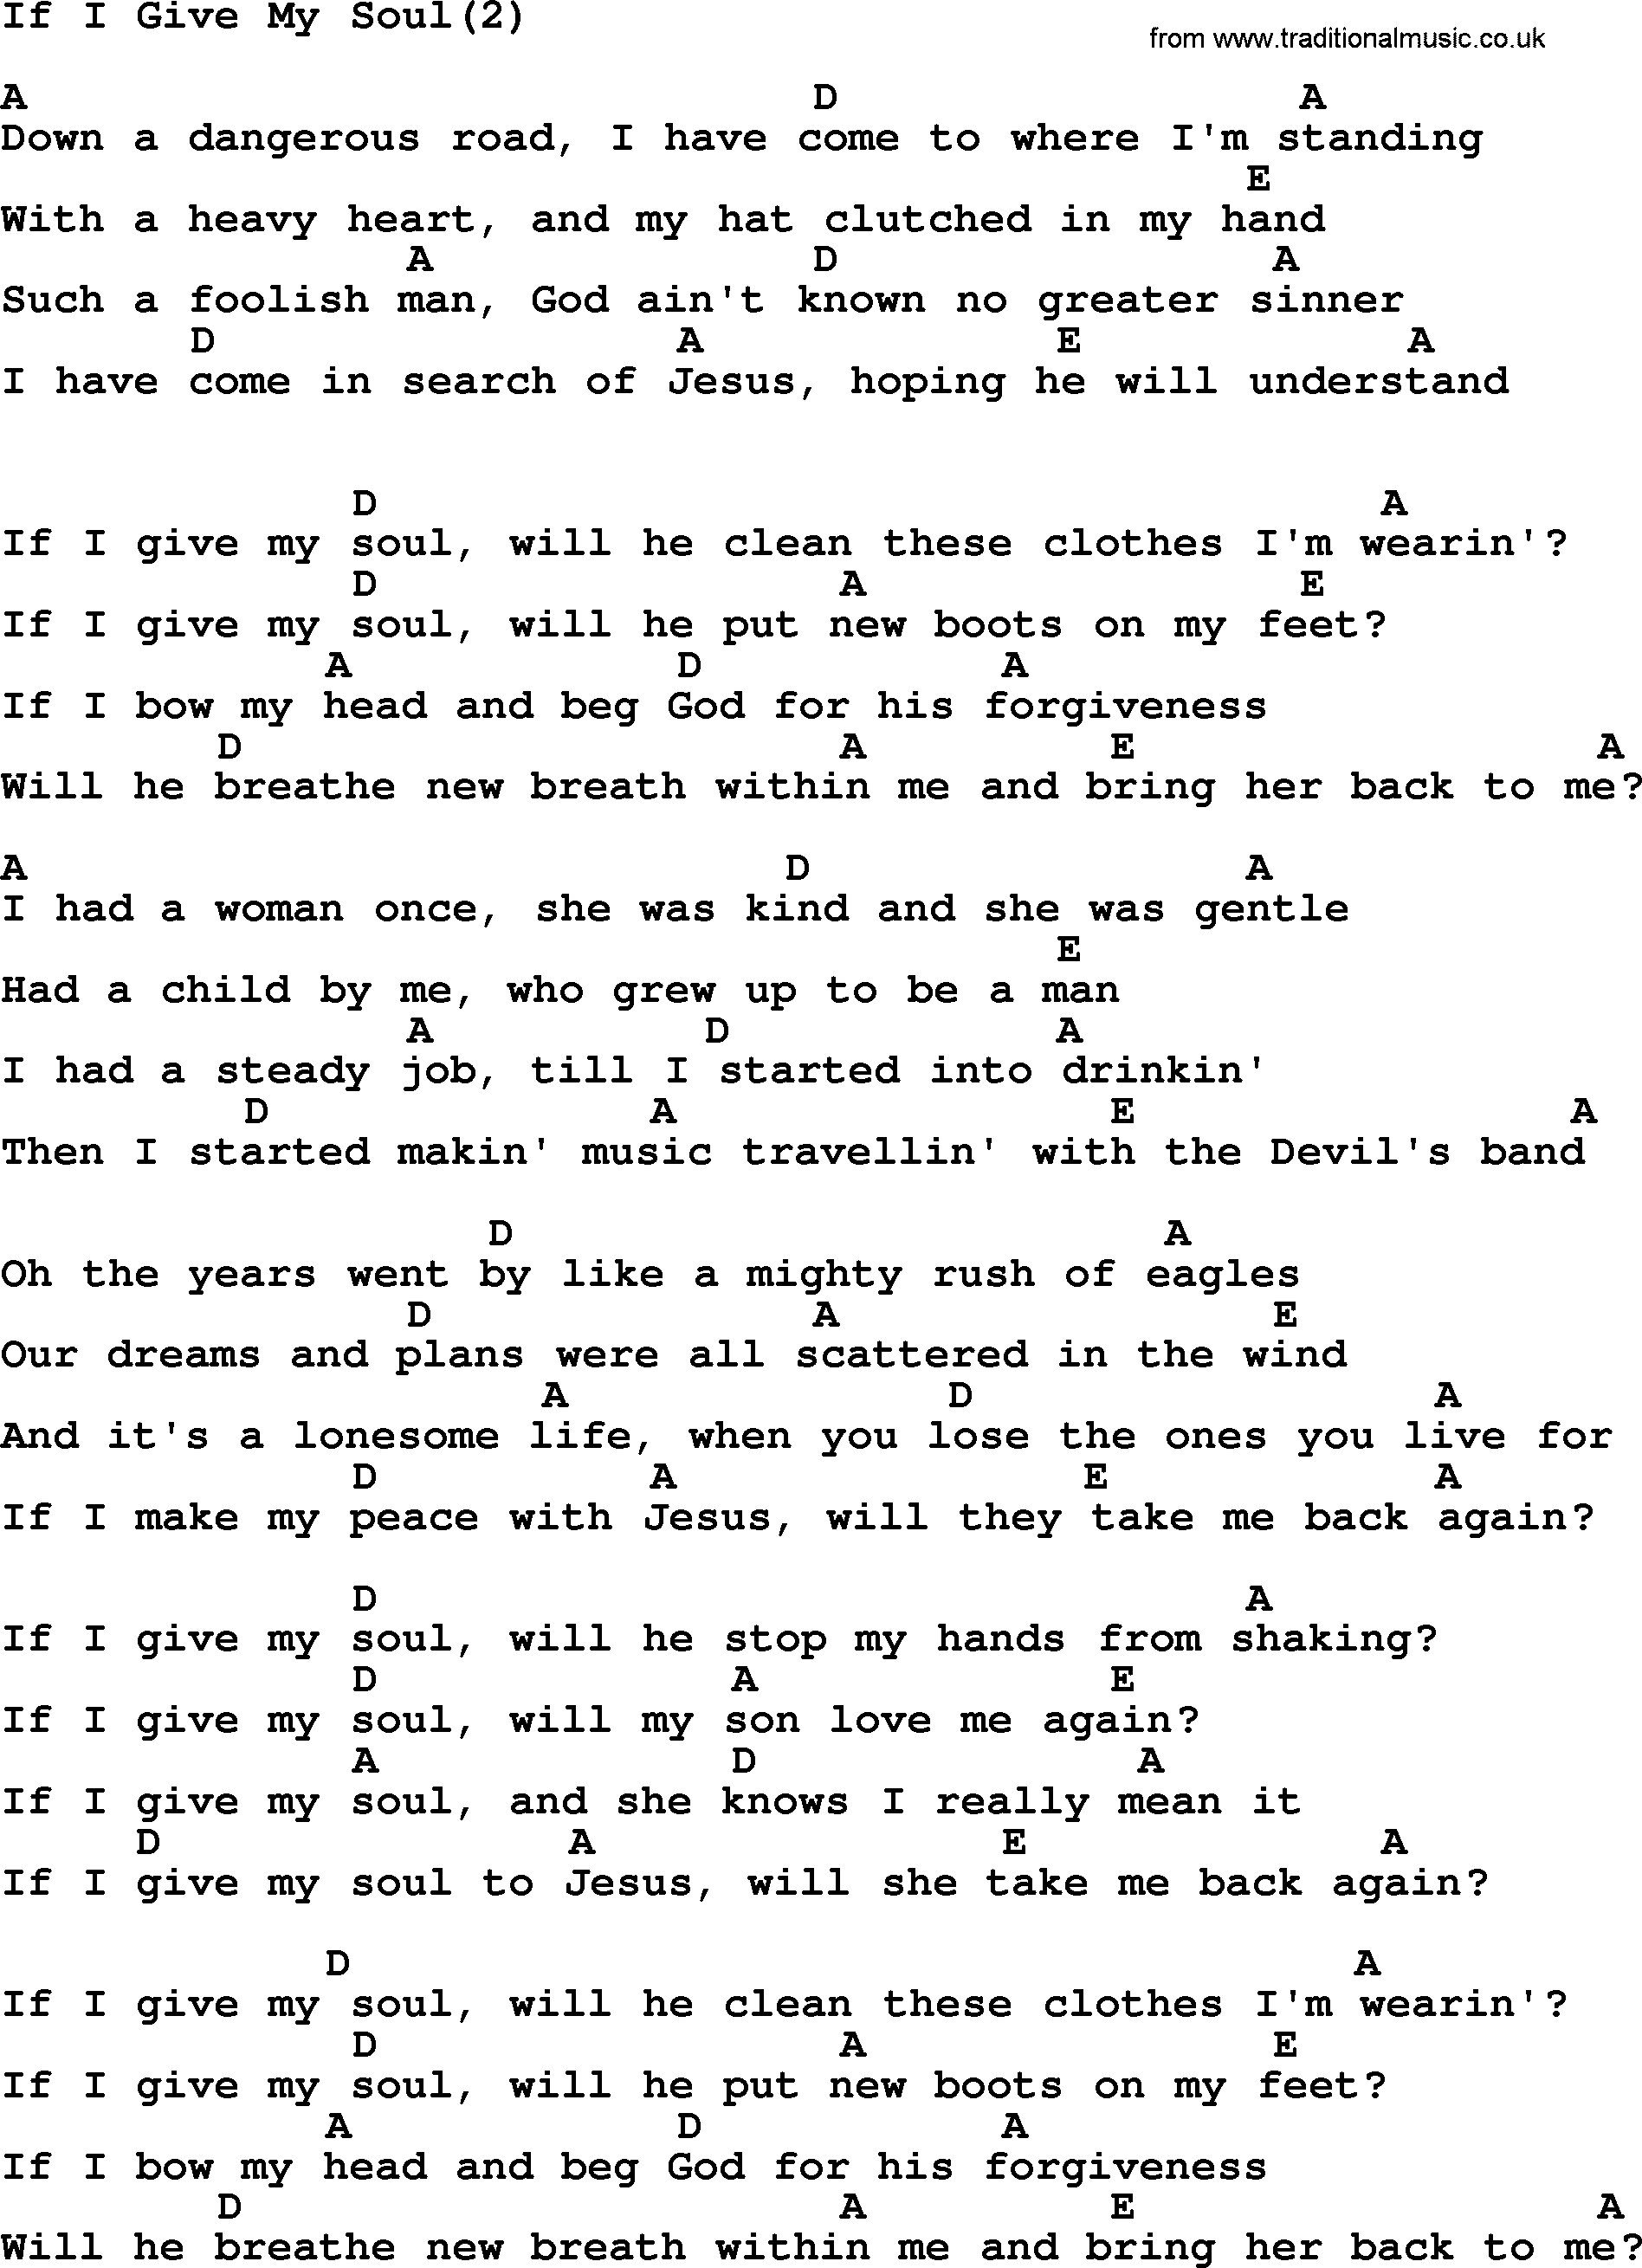 Johnny Cash song If I Give My Soul(2), lyrics and chords